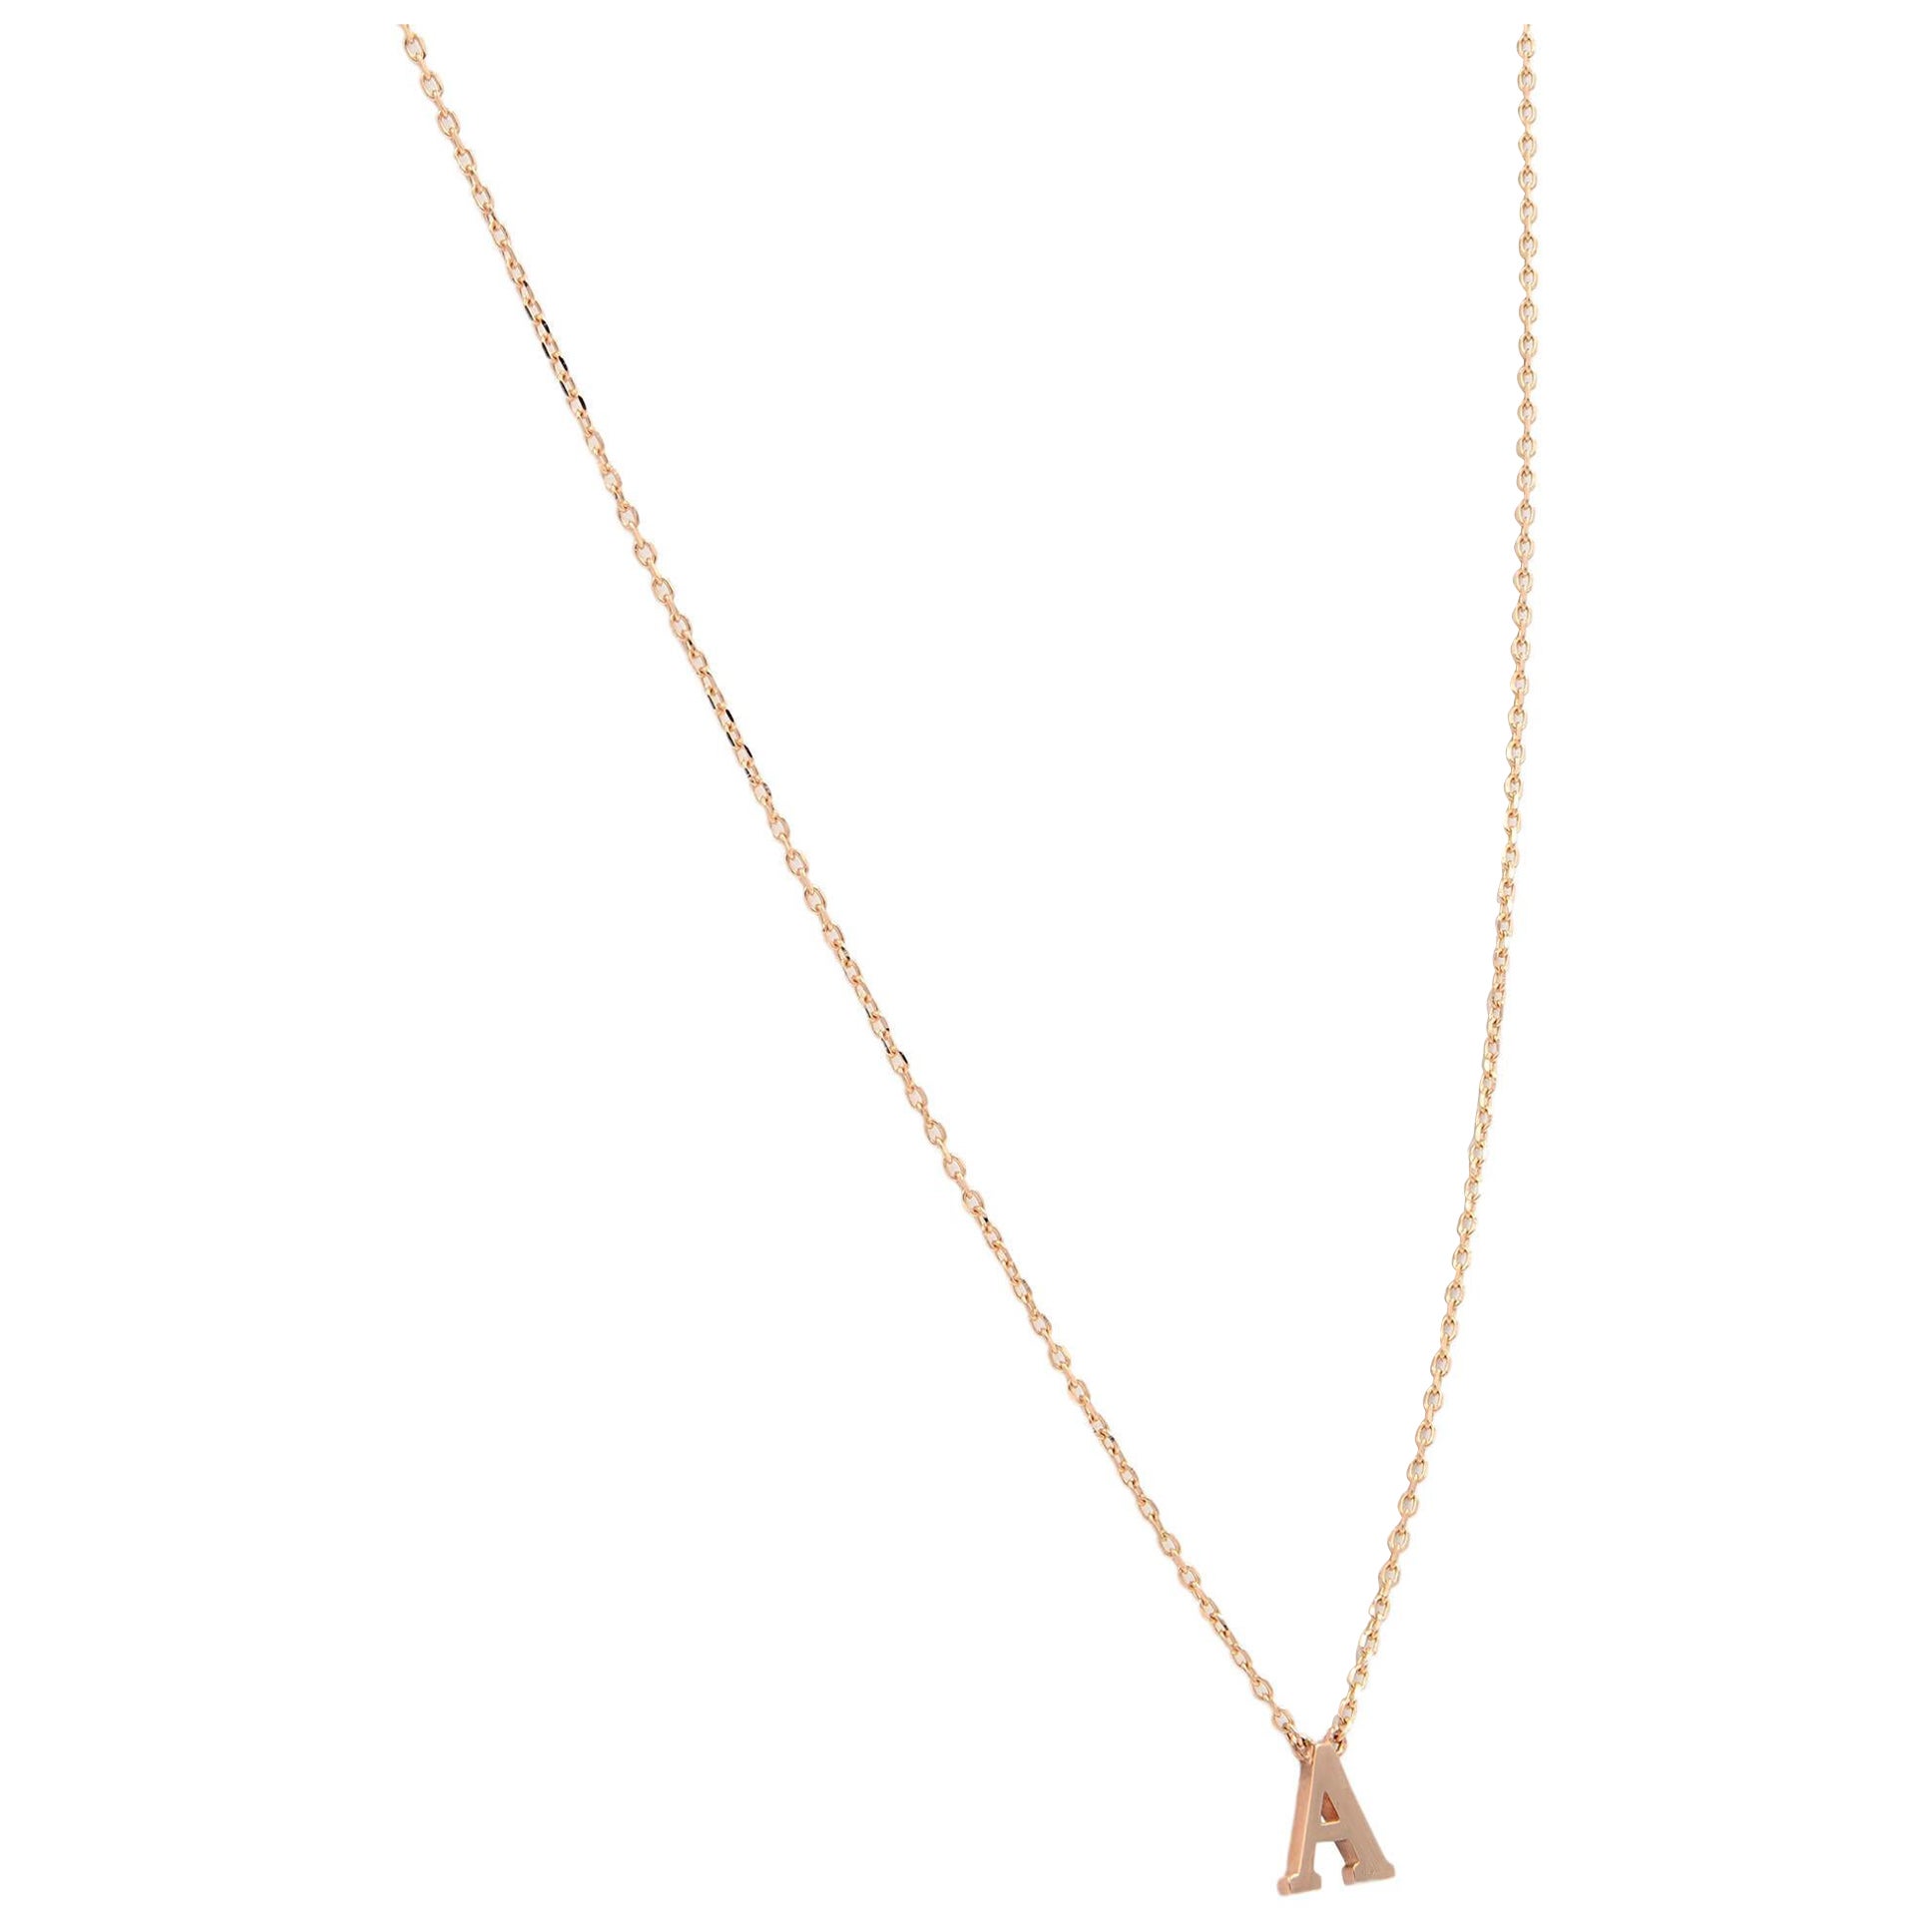 Rachel Koen Small 'A' Initial Letter Pendant Chain Necklace 14K Rose Gold For Sale